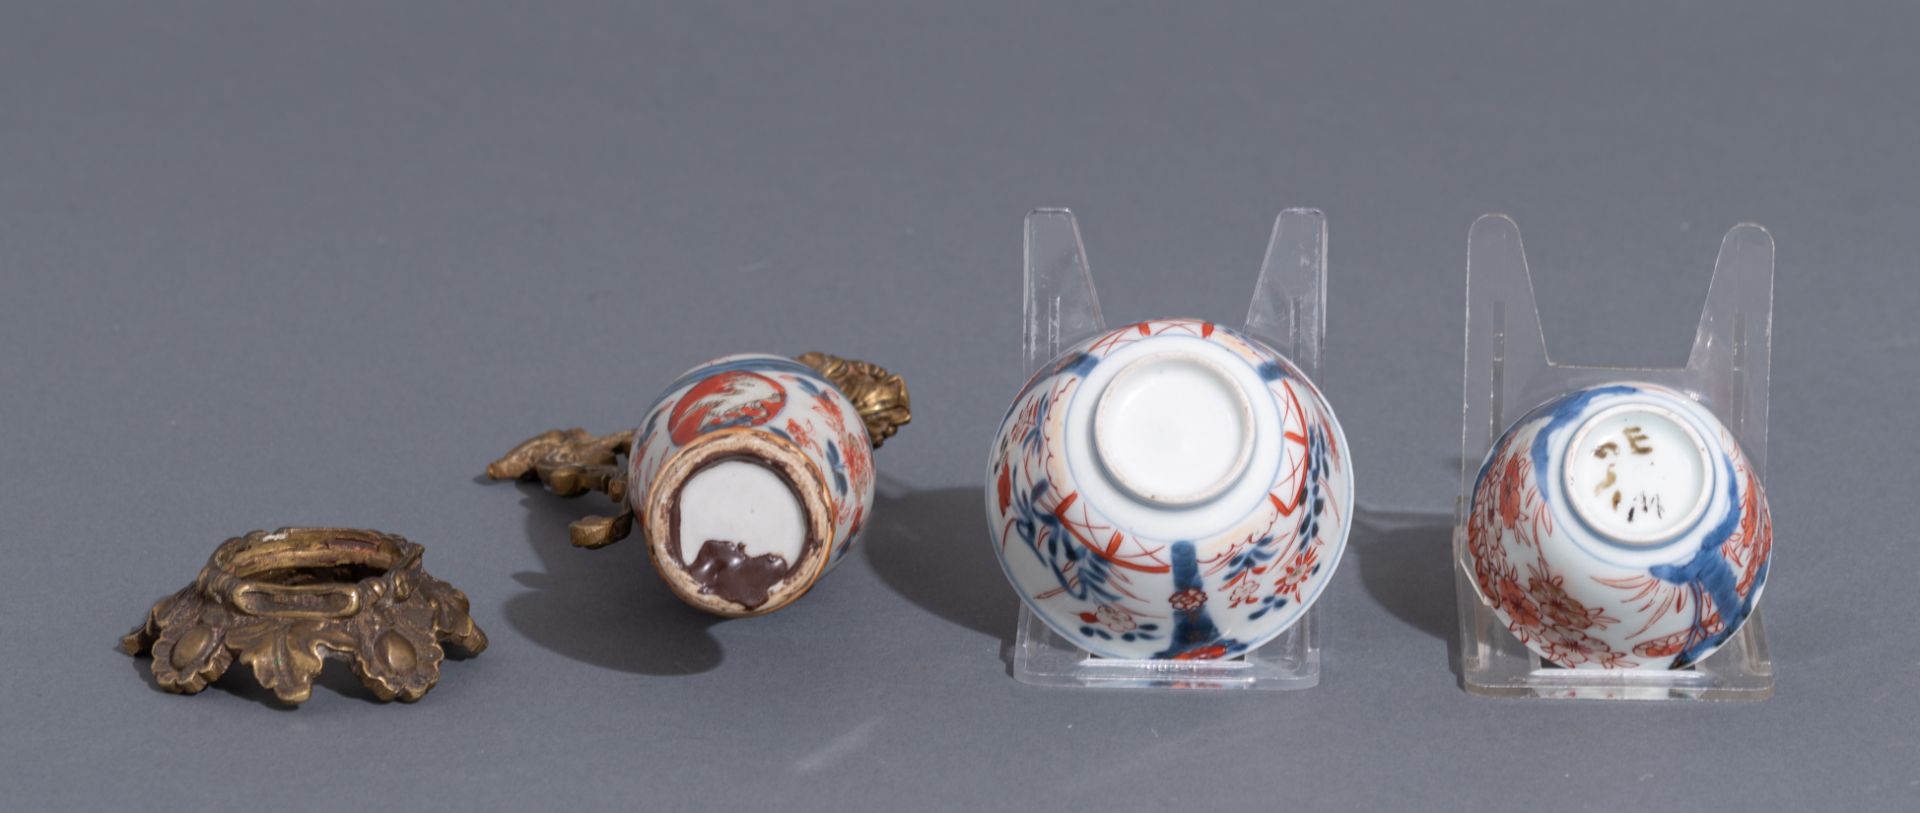 A collection of Chinese and Japanese porcelain items, 18th / 19th / 20thC, H 4 - 47 - ø 10,5 - 23 cm - Image 11 of 19